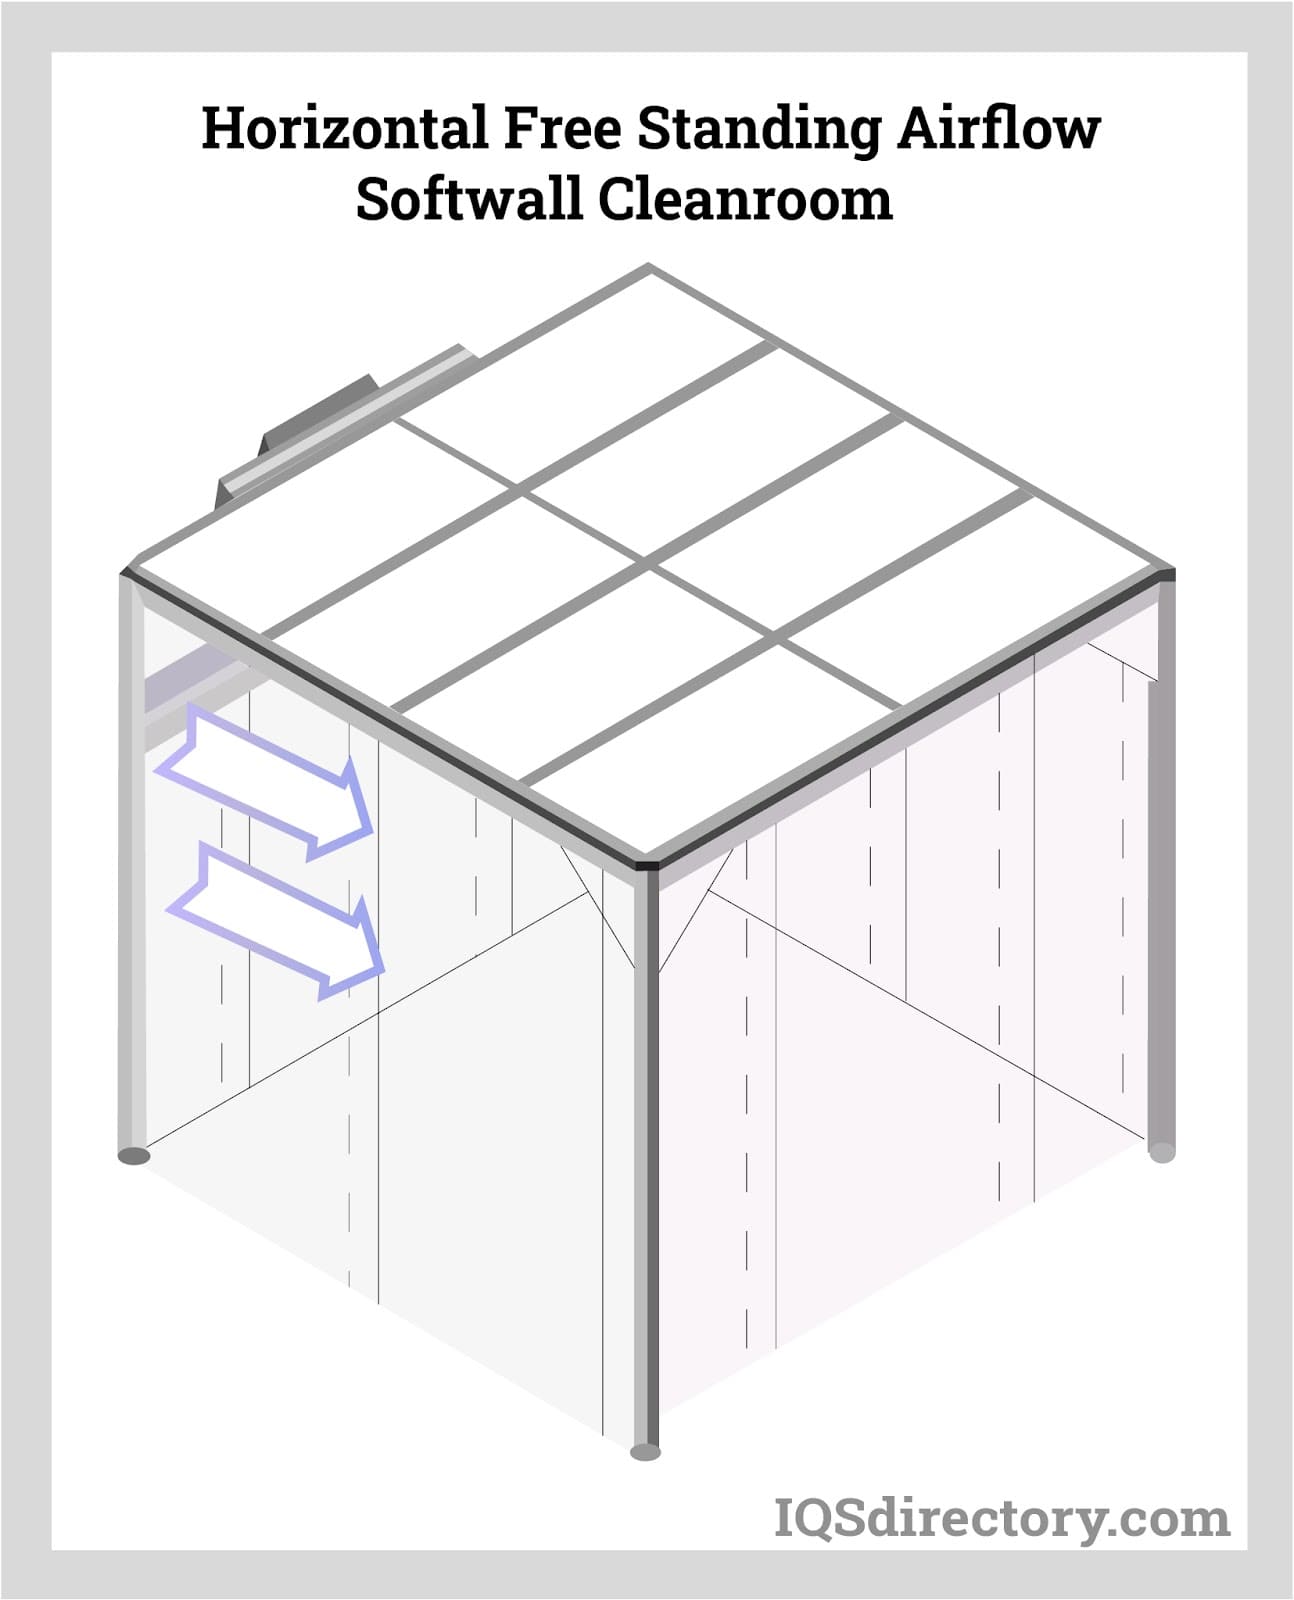 Horizontal Free Standing Airflow Softwall Cleanroom